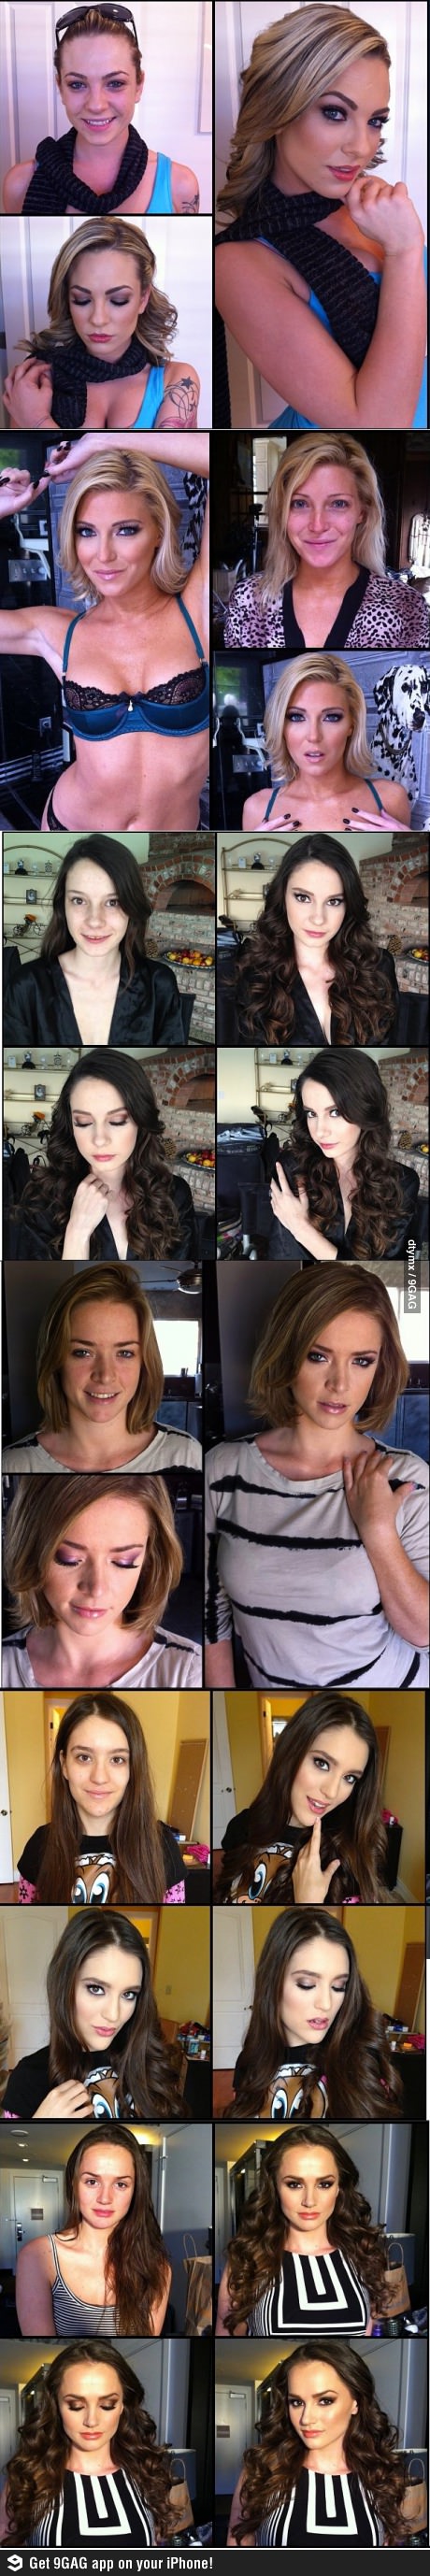 pornstars with and without makeup - meme